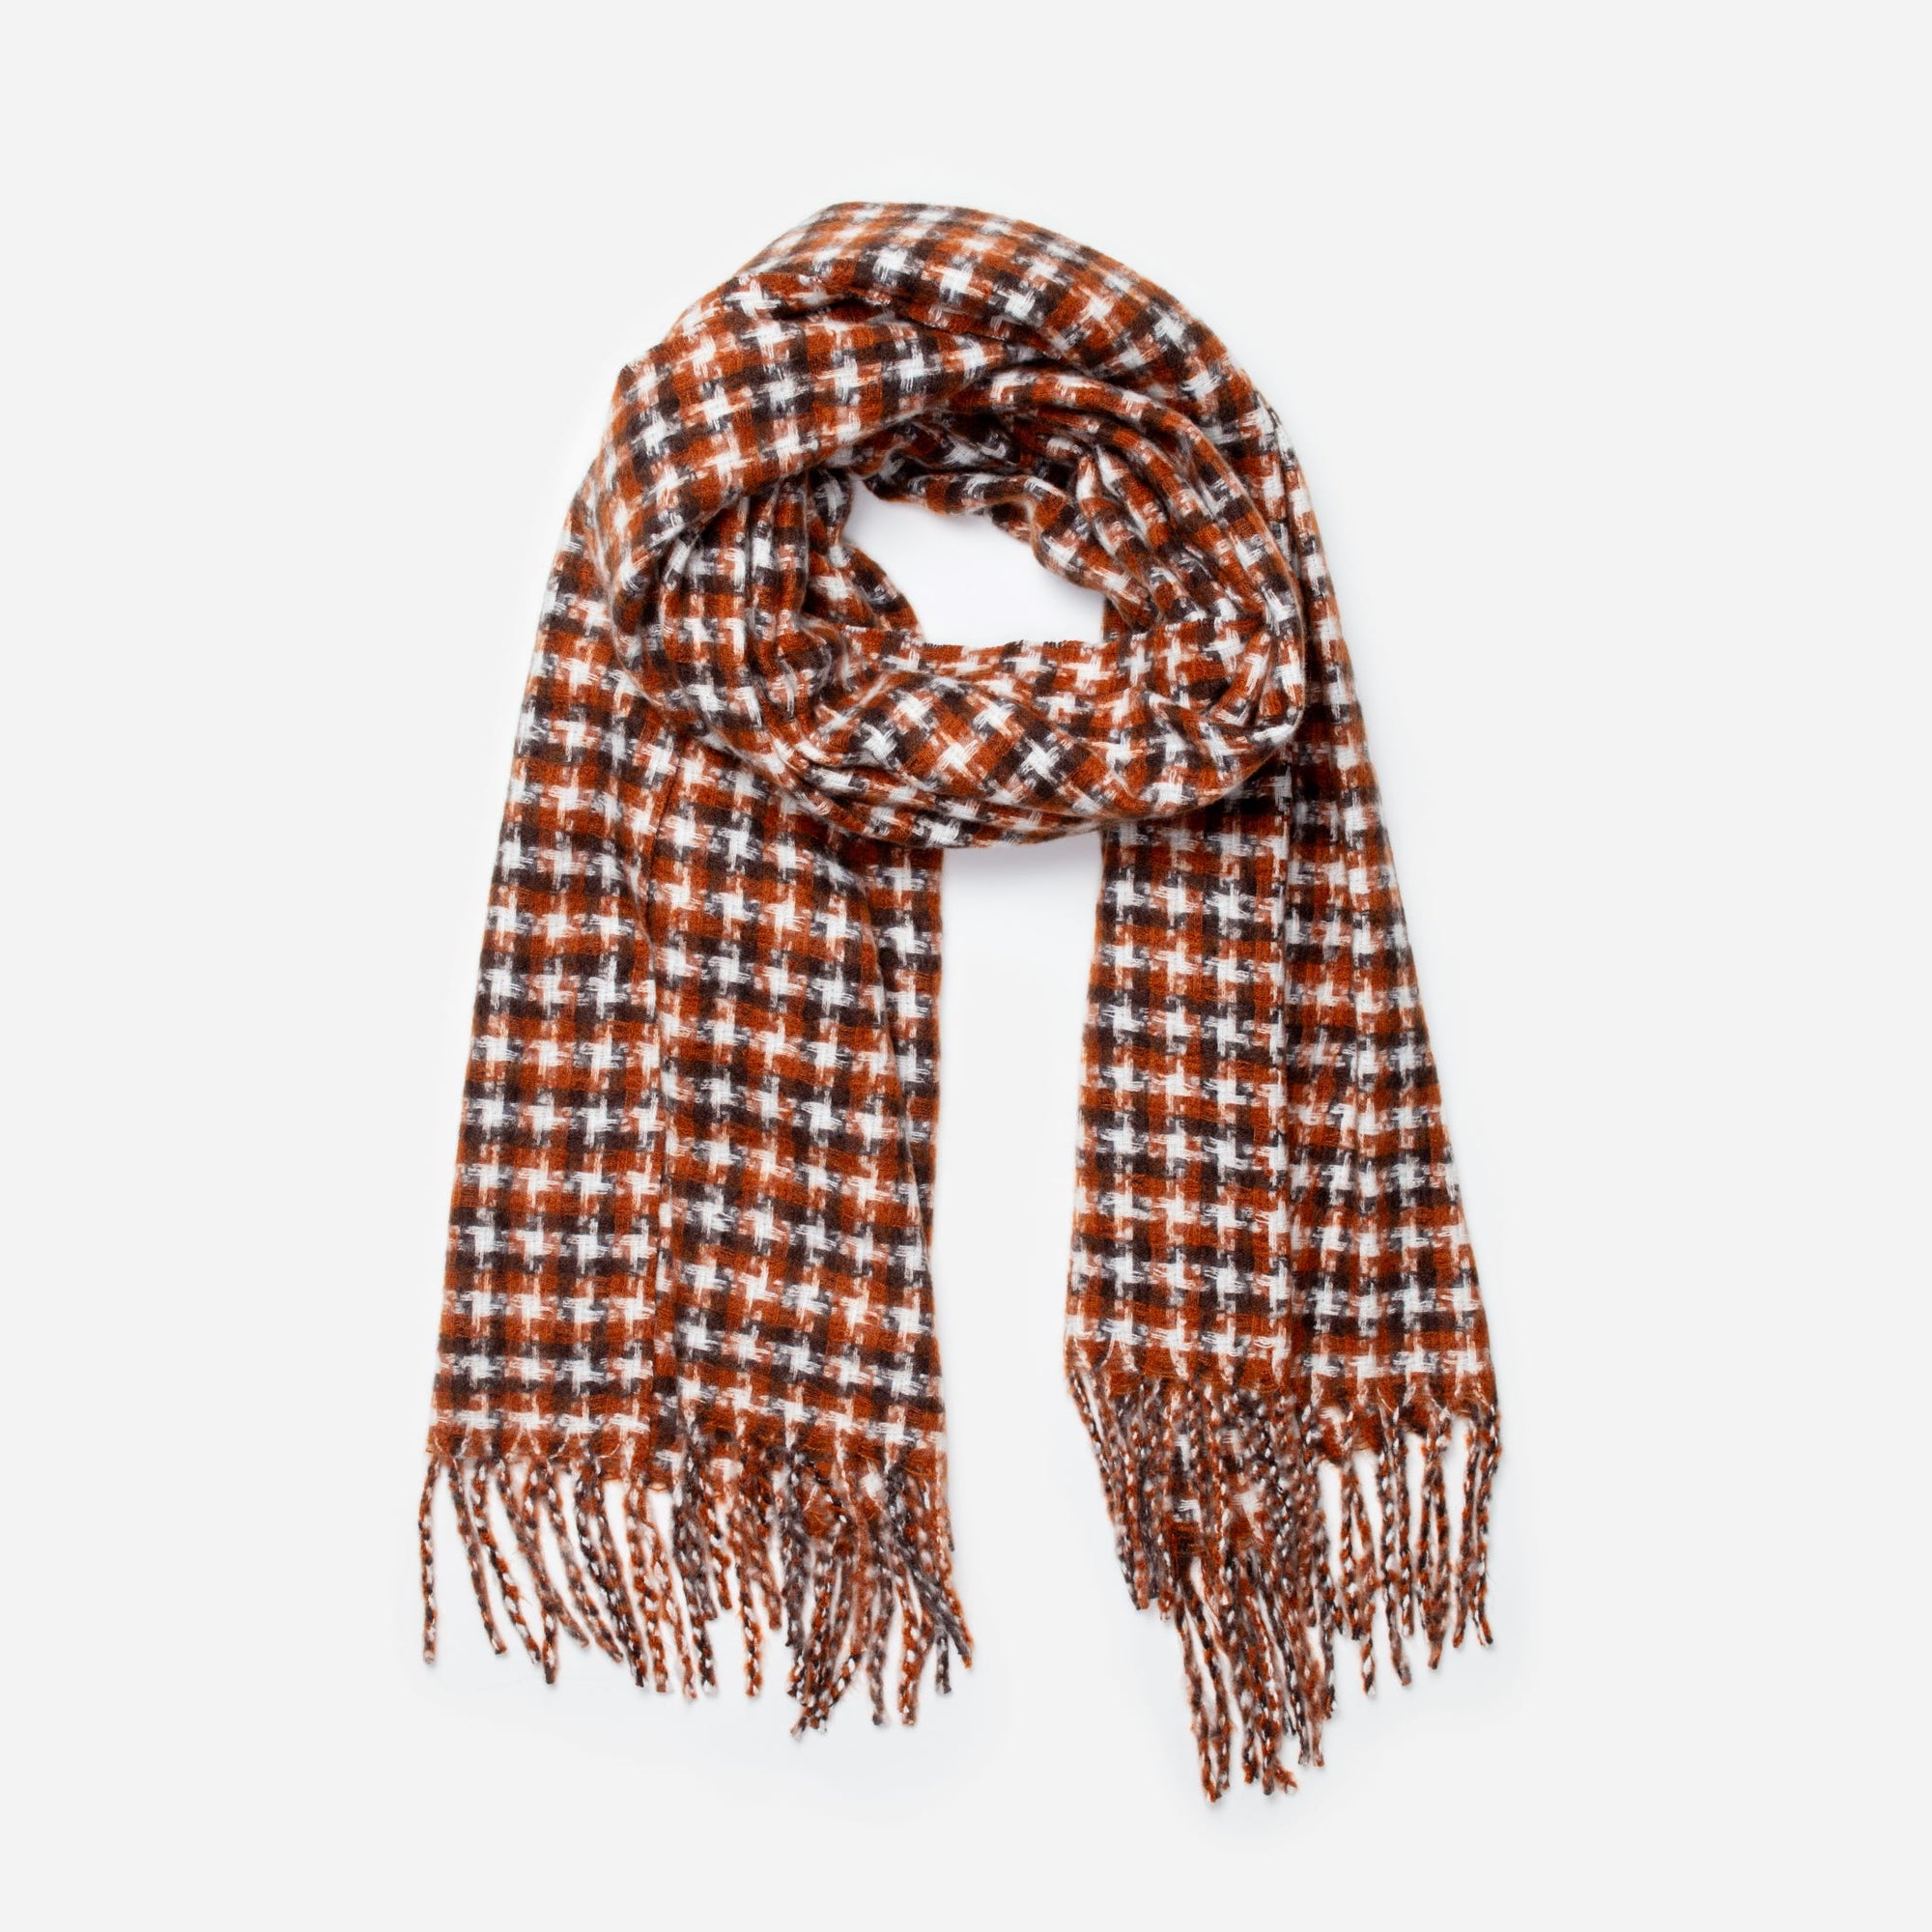 Black and white rust check scarf